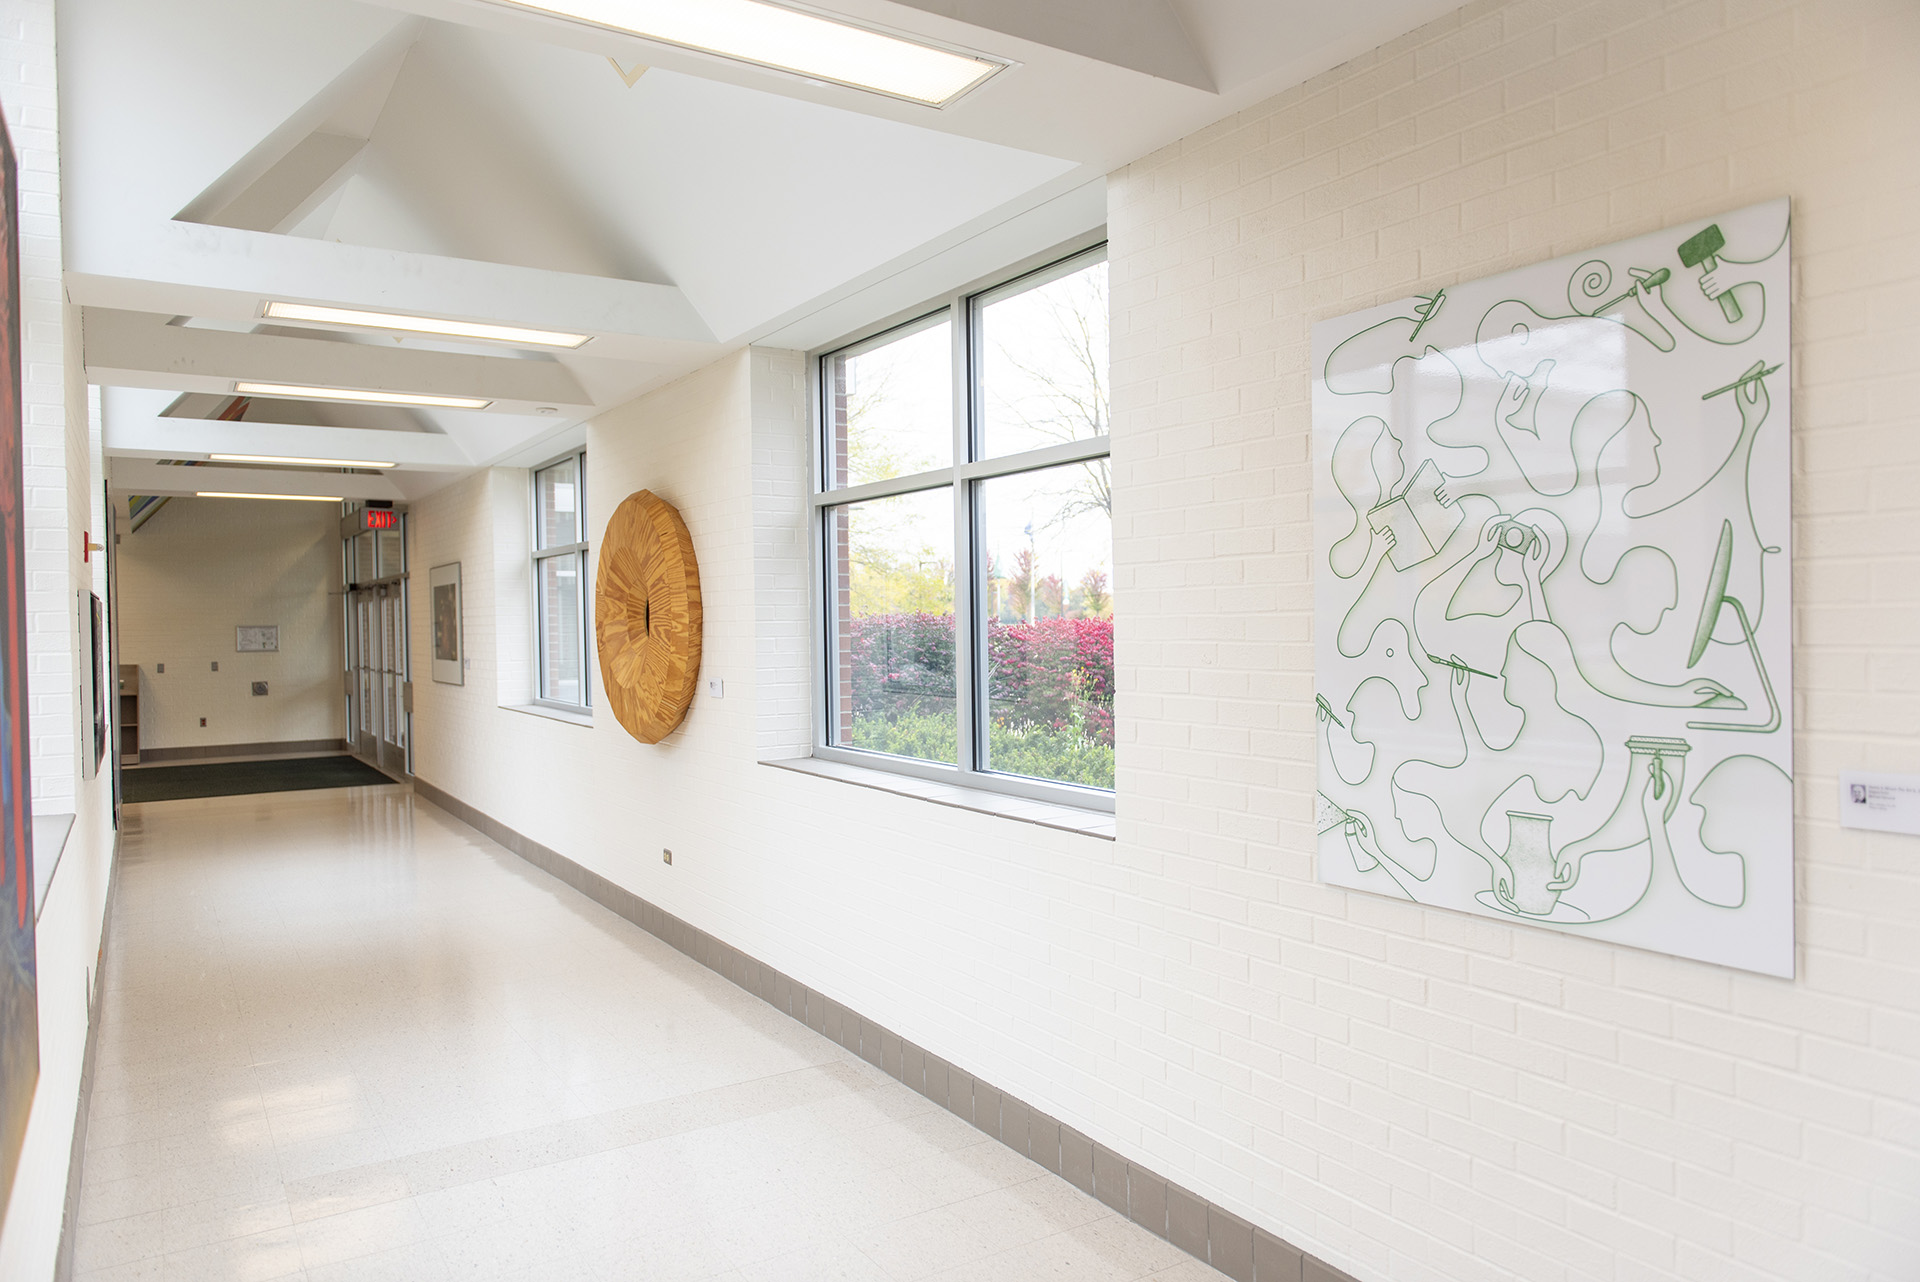 The Fine Arts Building features art work by students, faculty and community members.